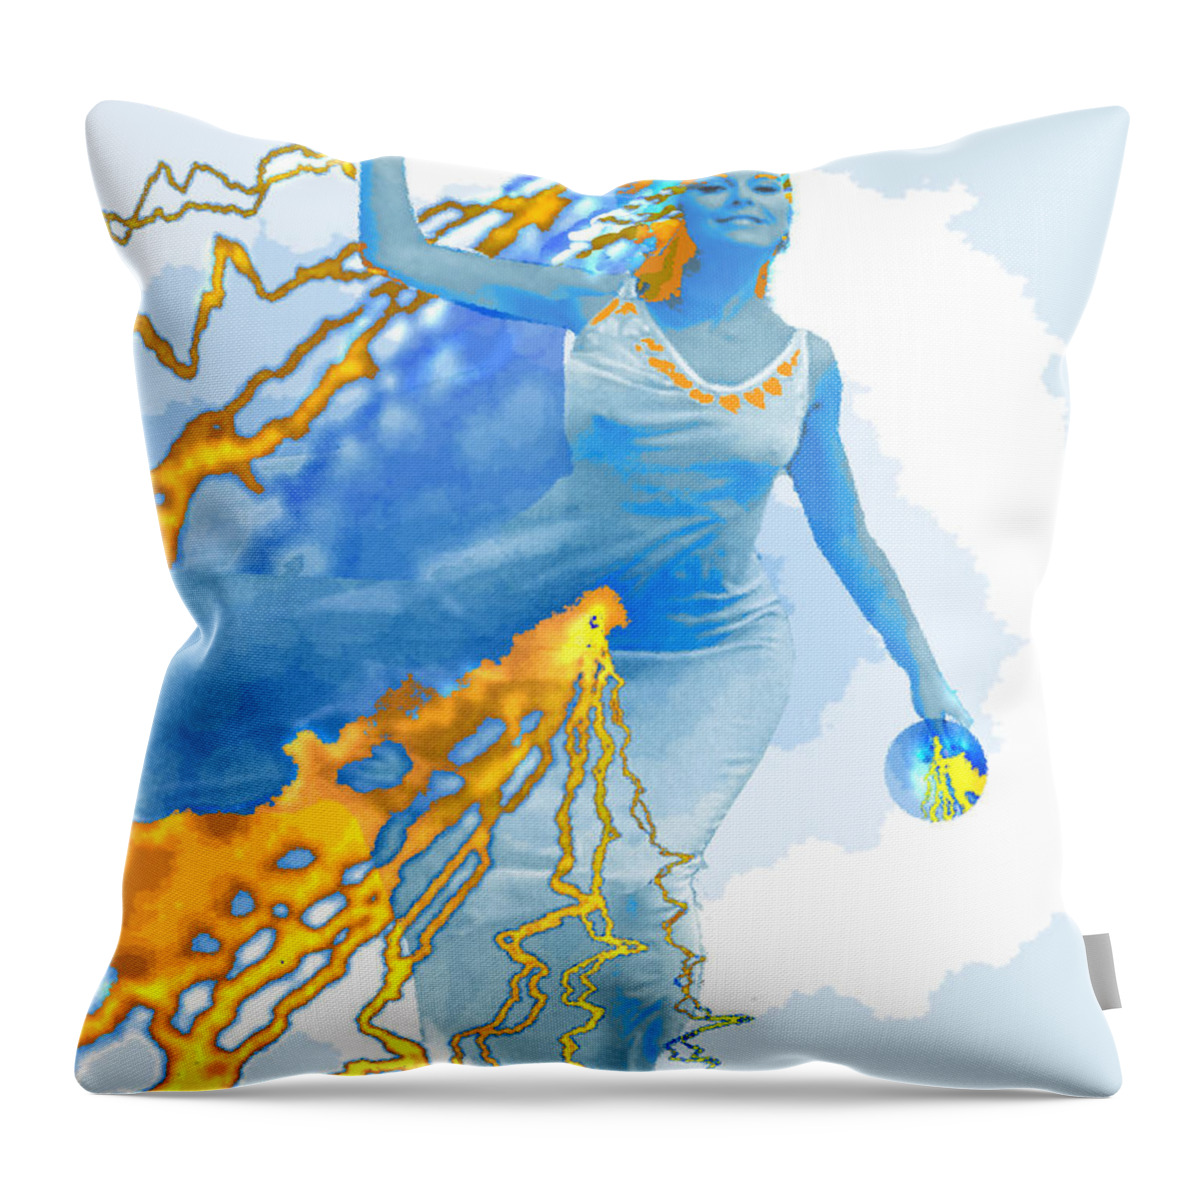 Cloudia Of The Clouds Throw Pillow featuring the digital art Cloudia Of The Clouds by Seth Weaver